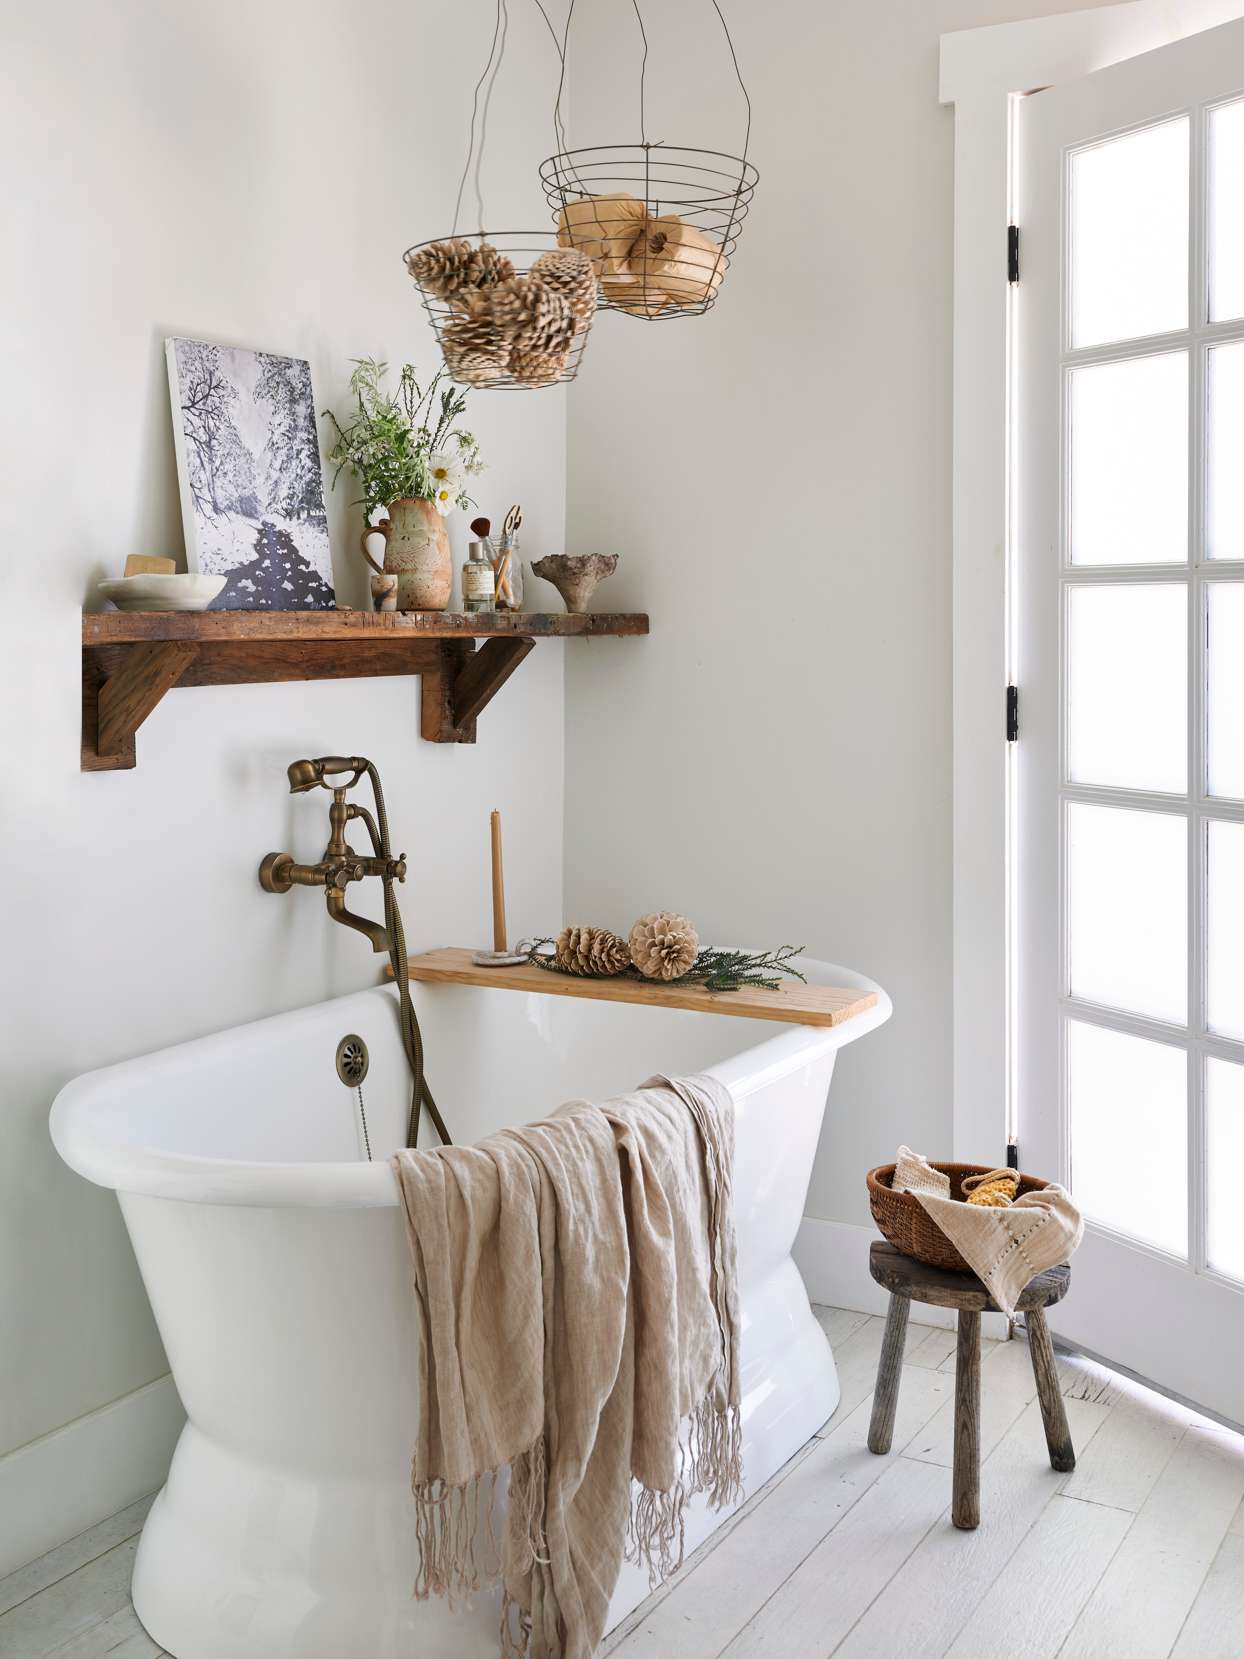 minimalist white bathroom with wood accents and pinecone decor